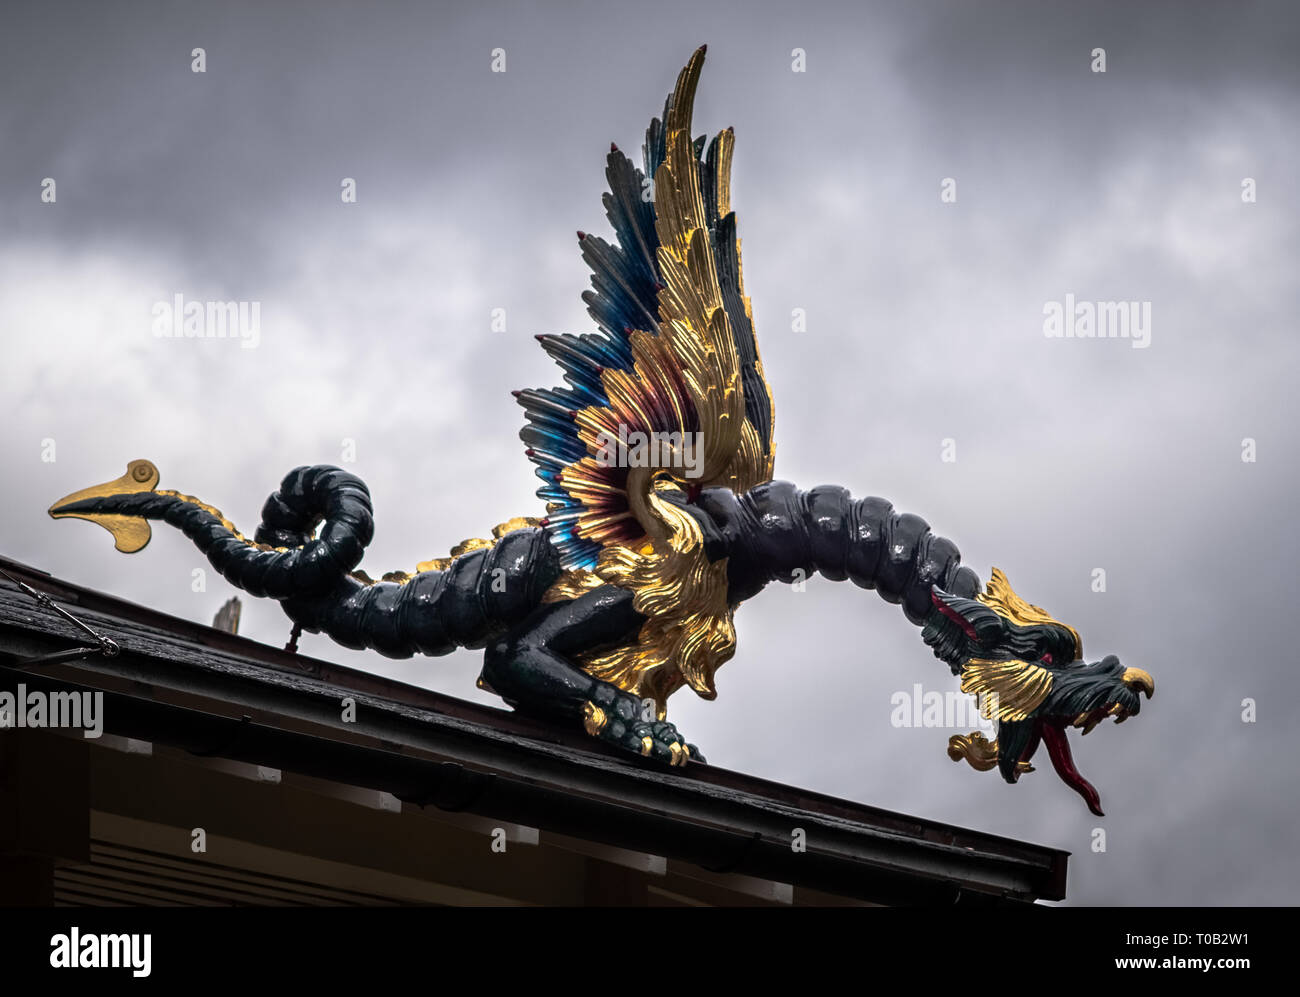 London, United Kingdom: side view of one of the Japanese dragon statue on the Great Pagoda, Kew Gardens. Stock Photo